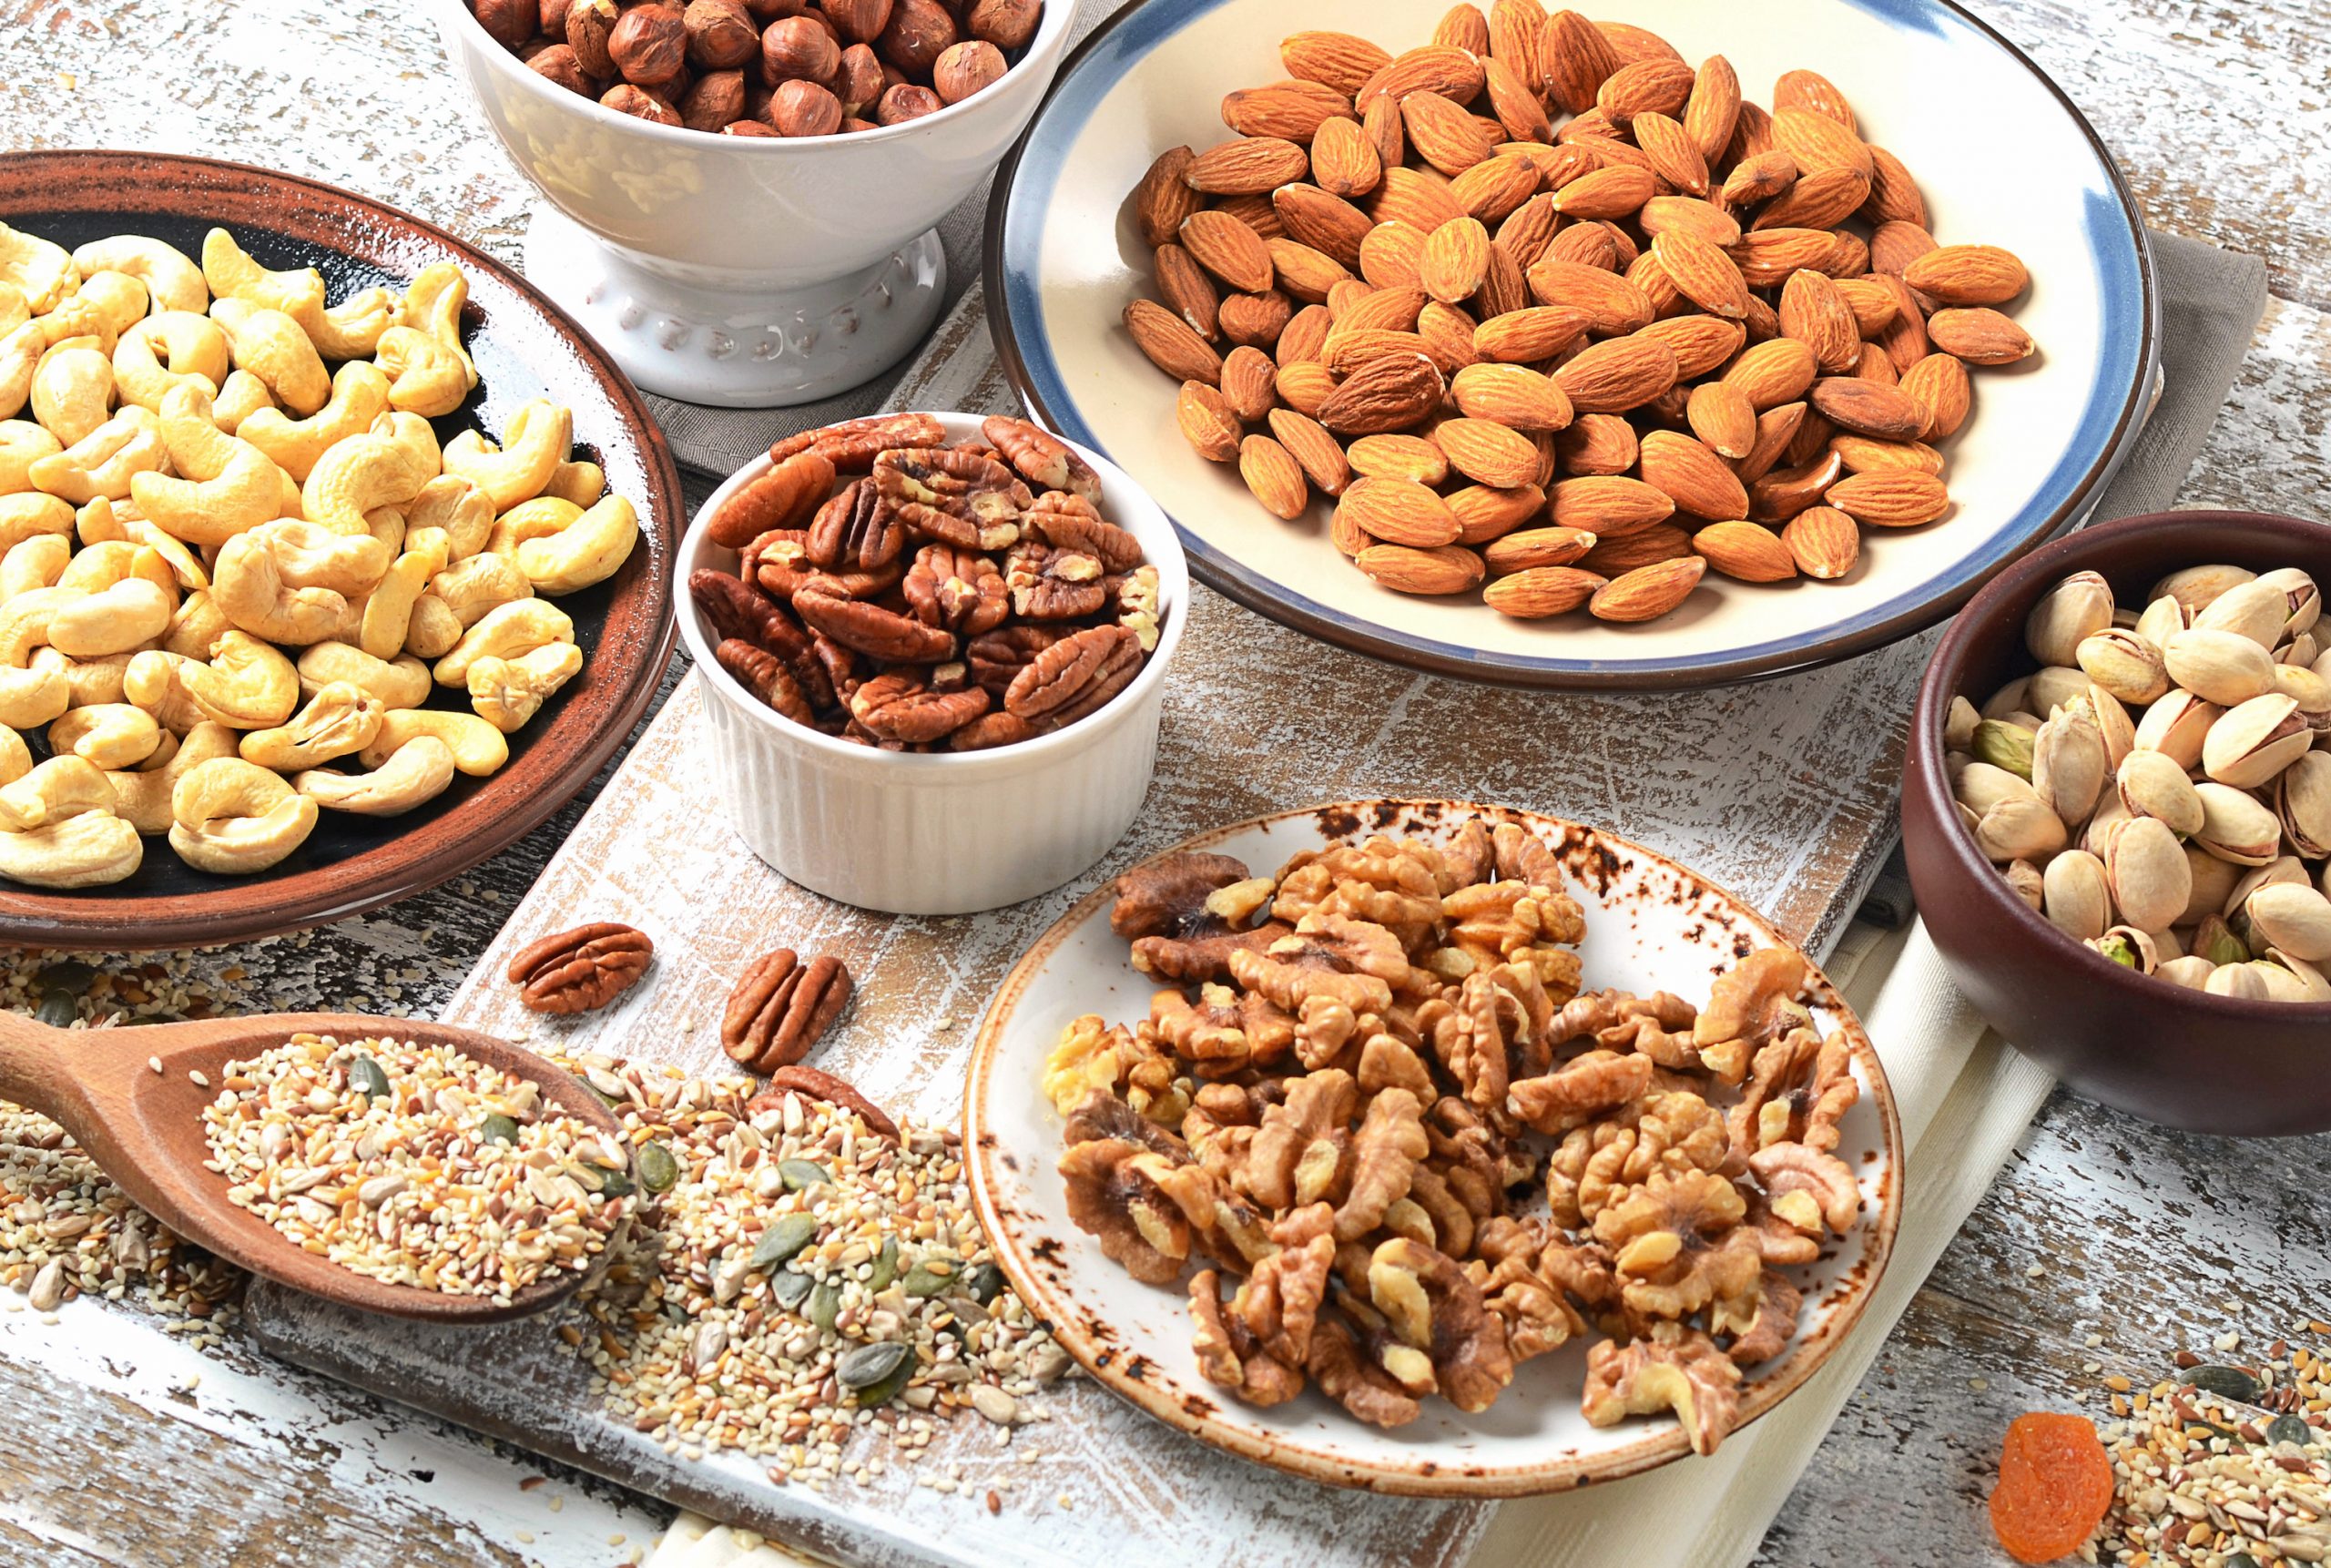 Assorted mixed nuts on wooden table.